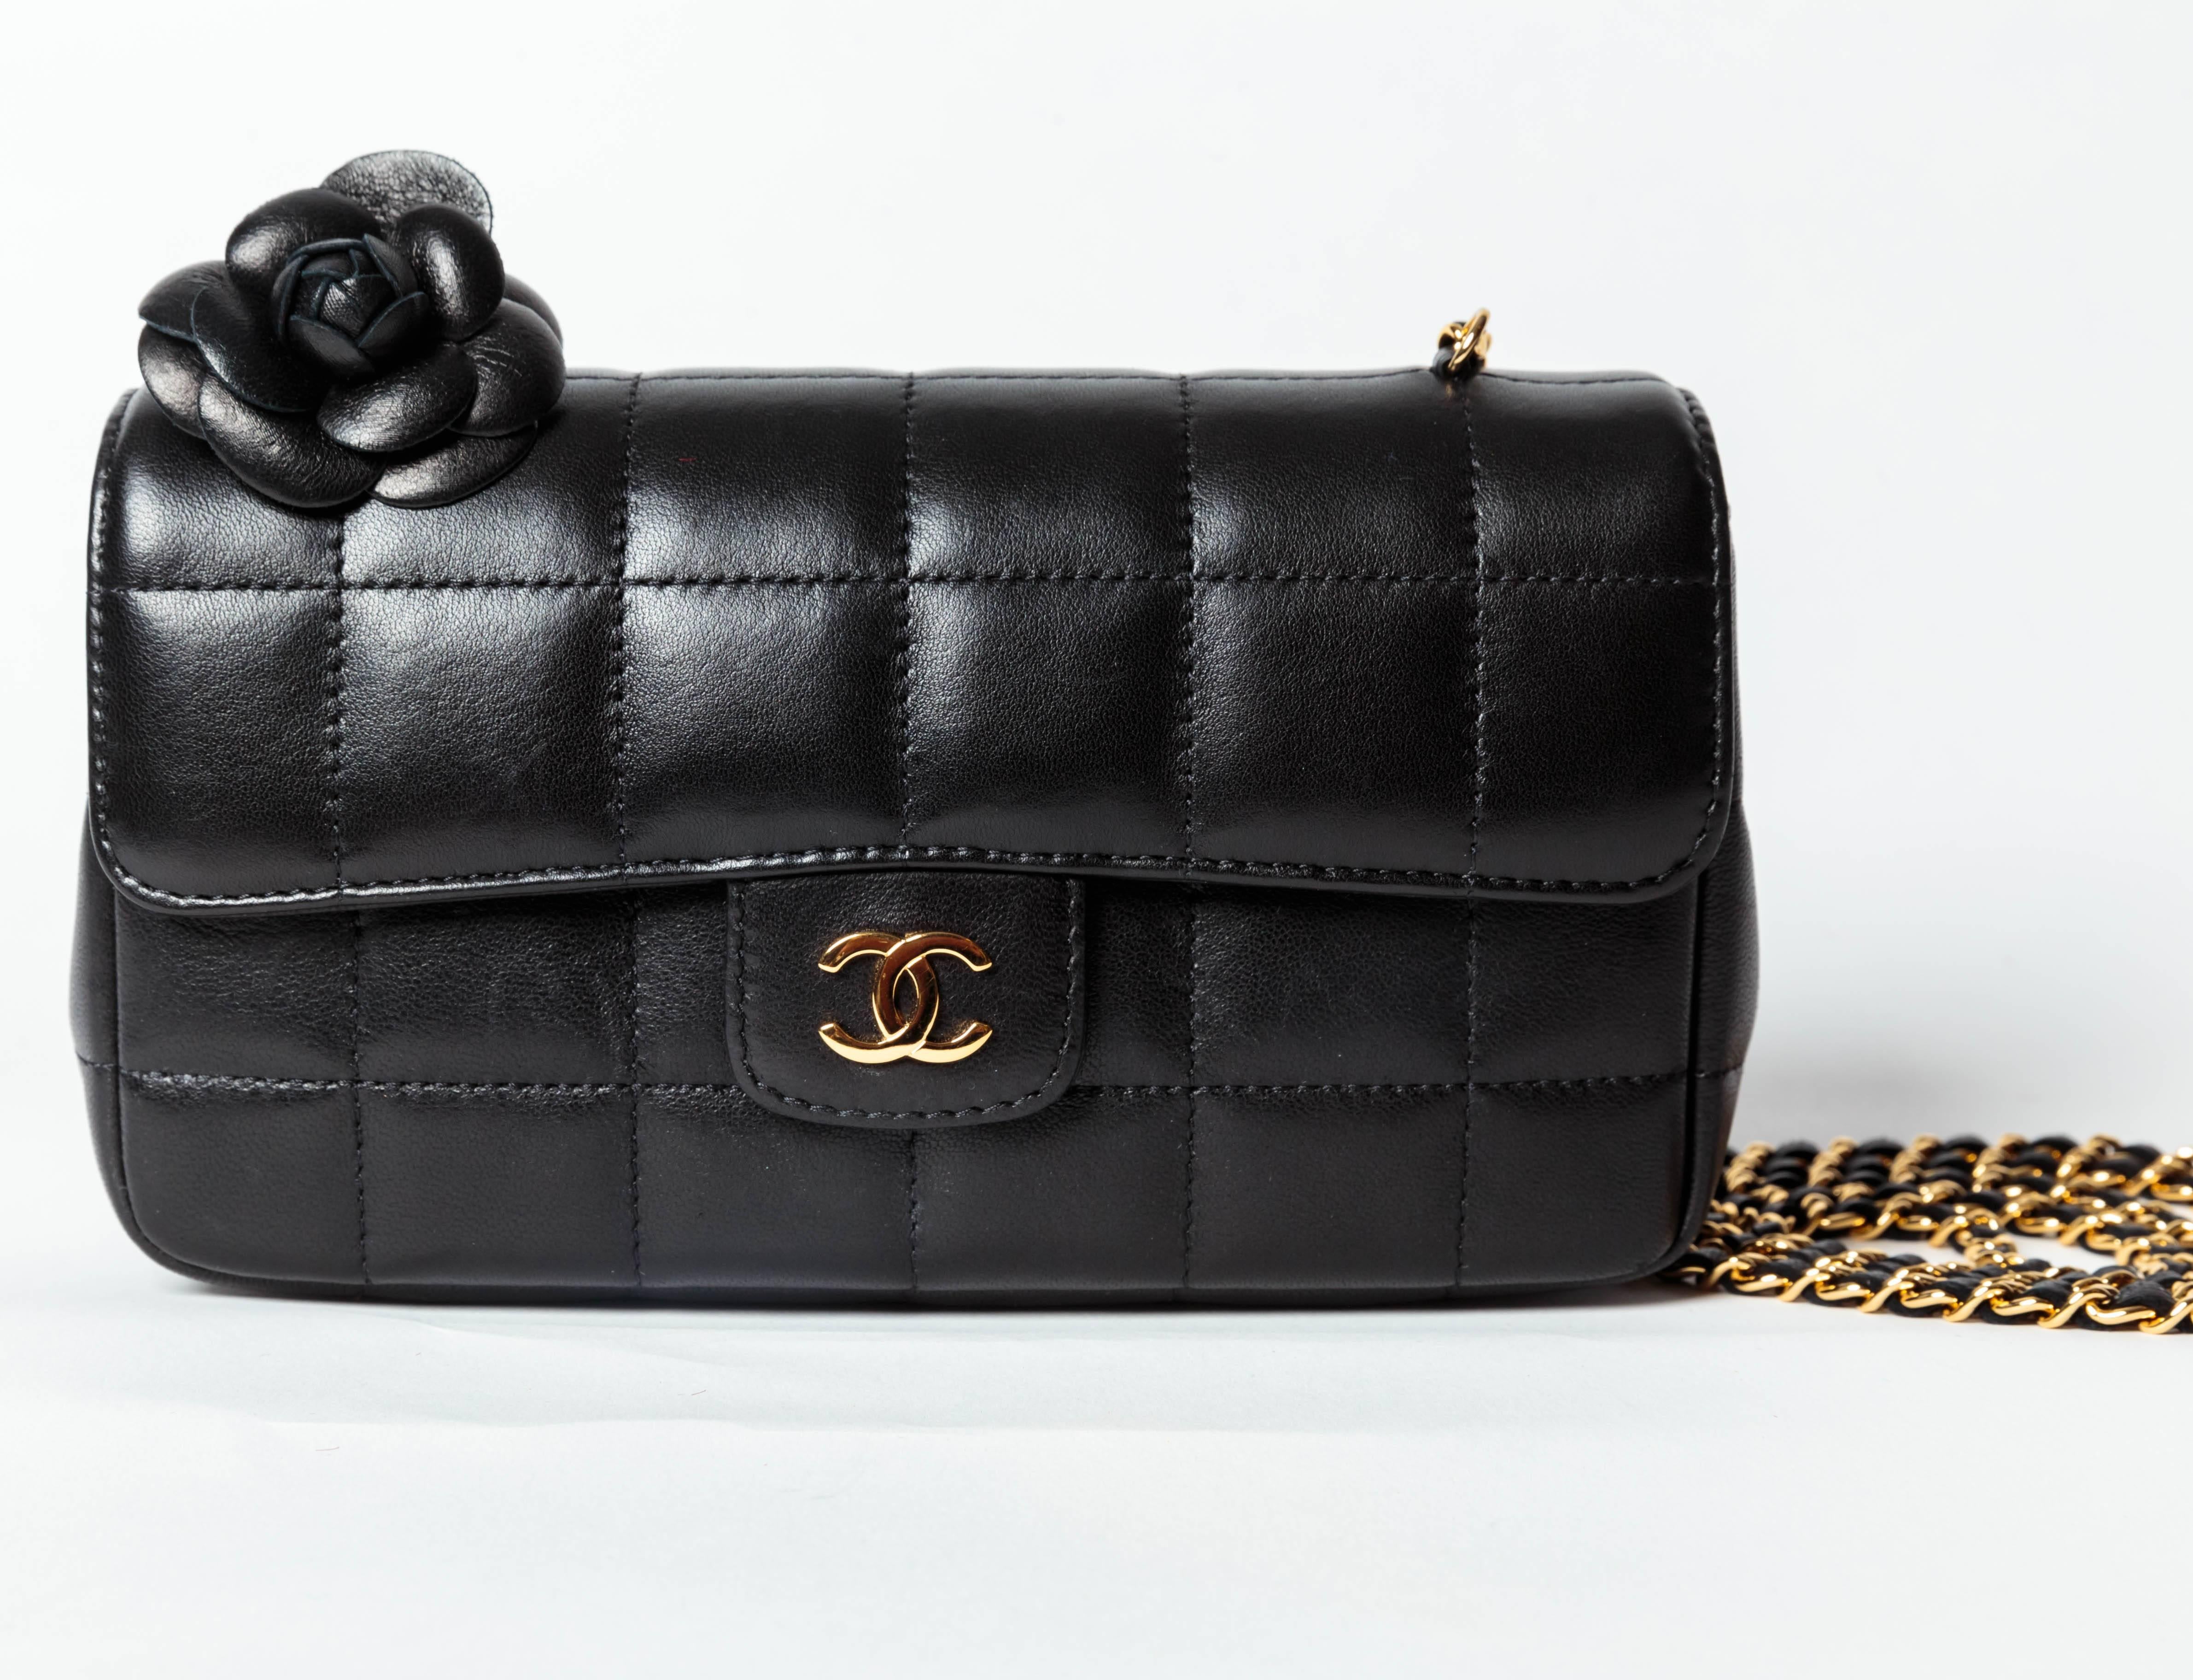 Stunning small Chanel shoulder bag in quilted black lambskin with gold chain strap. The bag features a layered leather camellia.
Chanel logo fabric lining with one flap pocket. 
Condition is excellent. Original Chanel box and dustbag are